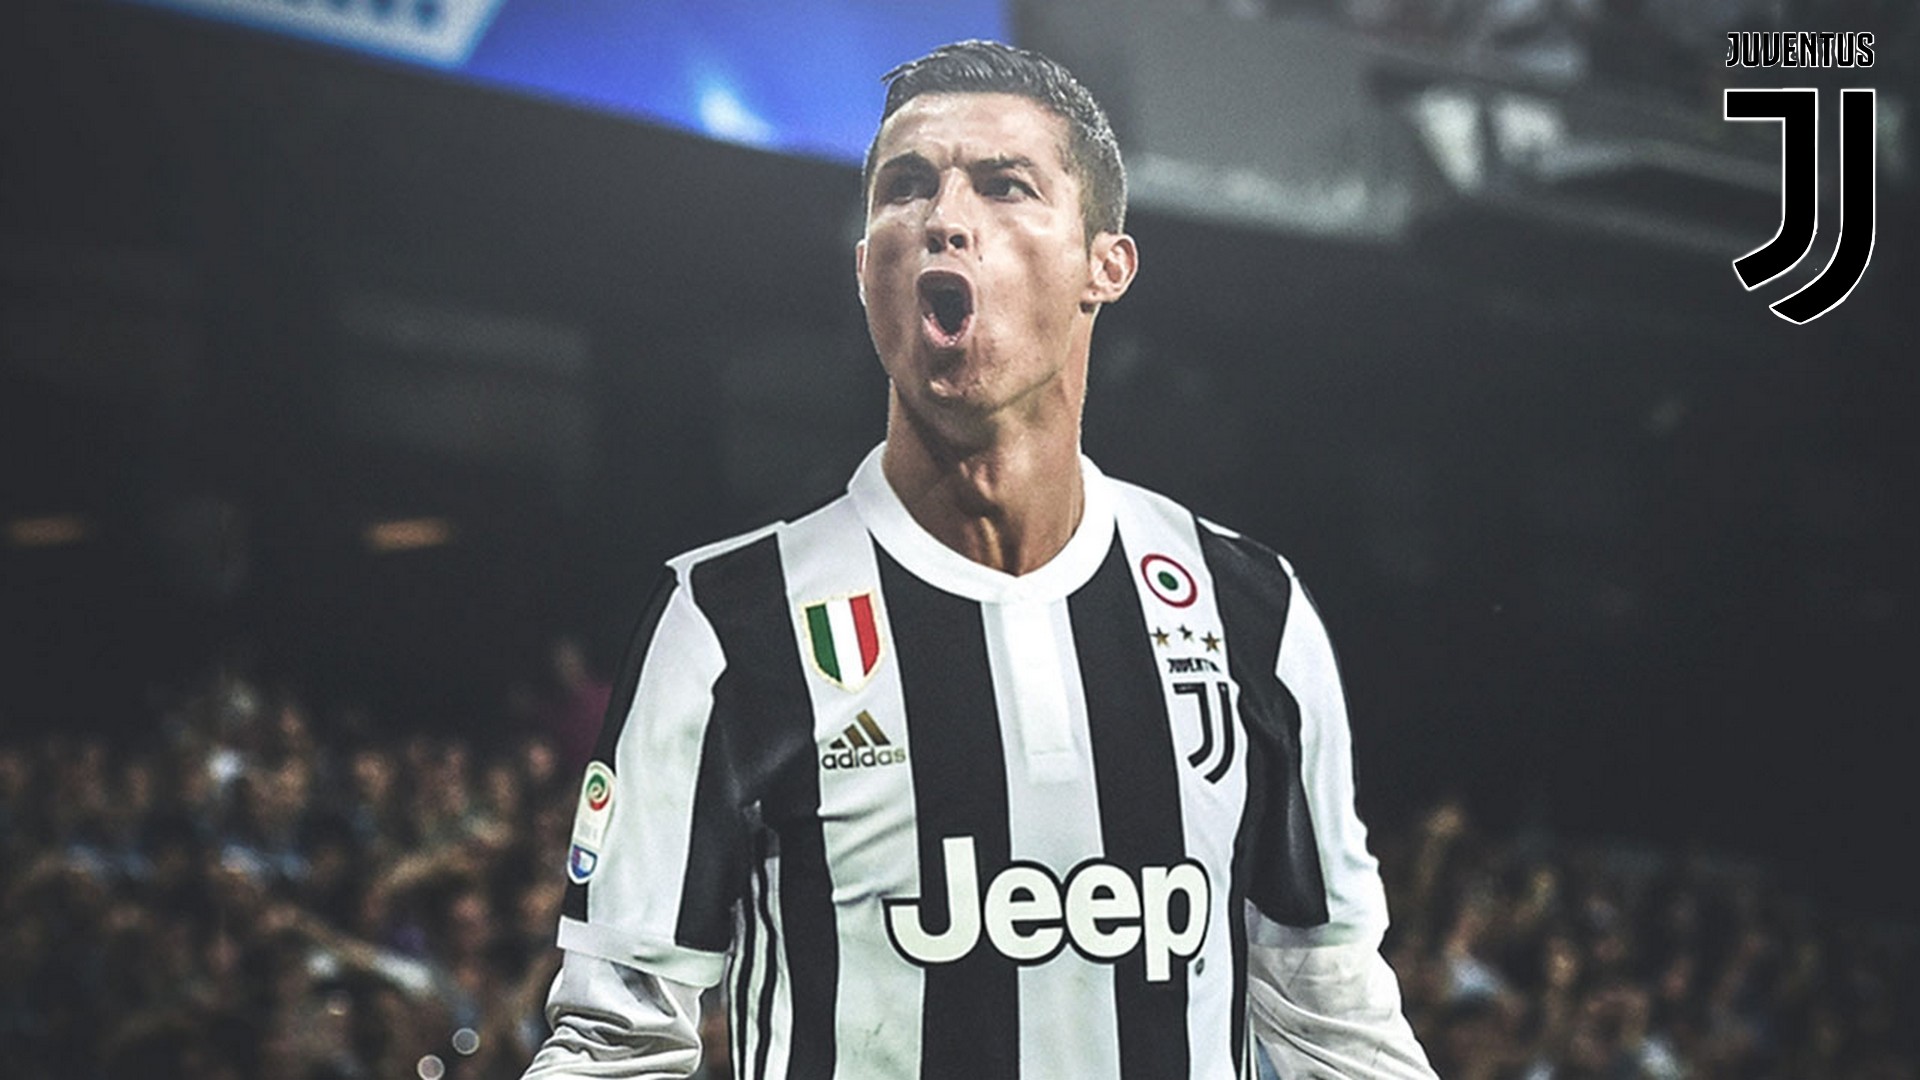 Wallpaper Desktop Ronaldo 7 Juventus HD with resolution 1920x1080 pixel. You can make this wallpaper for your Mac or Windows Desktop Background, iPhone, Android or Tablet and another Smartphone device